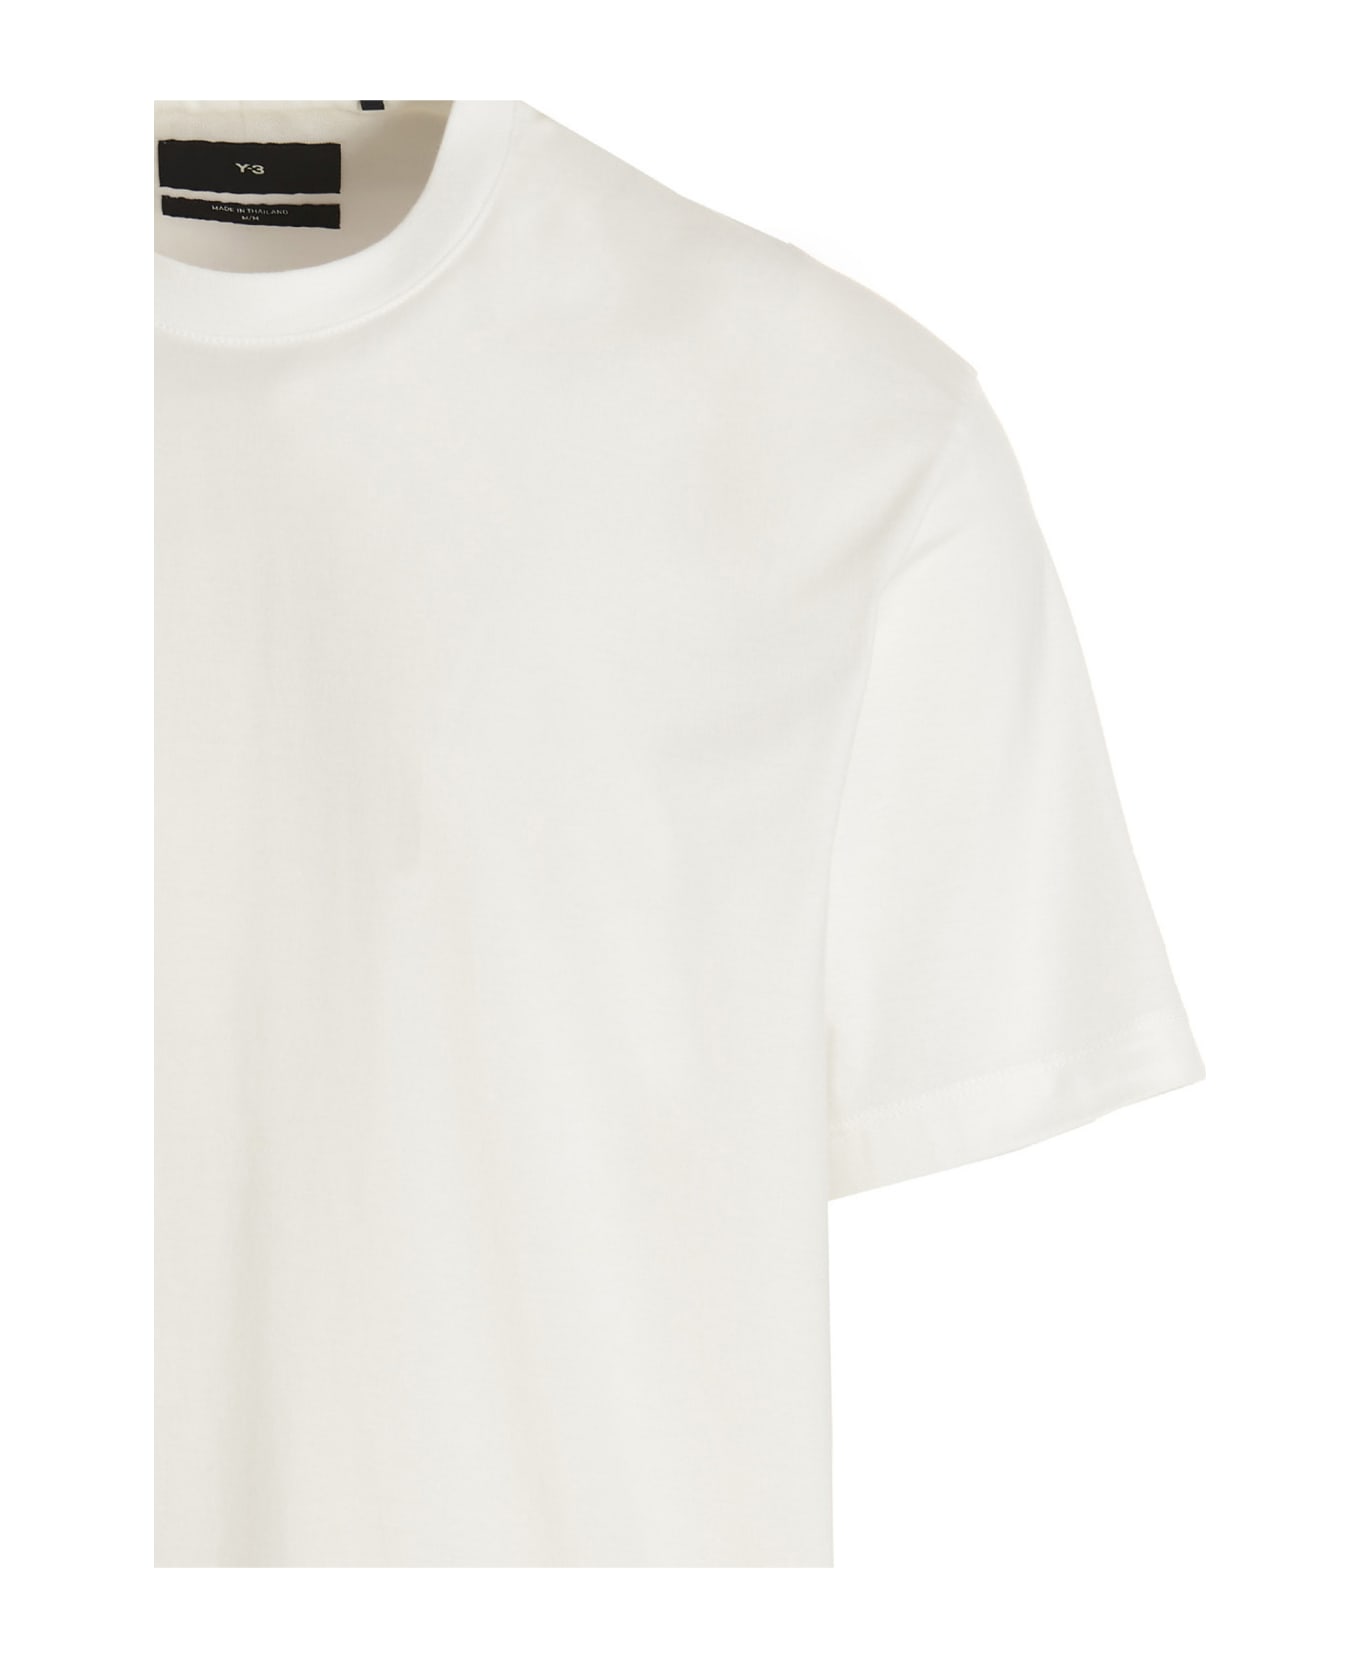 Y-3 T-shirt 'relaxed Ss' - White